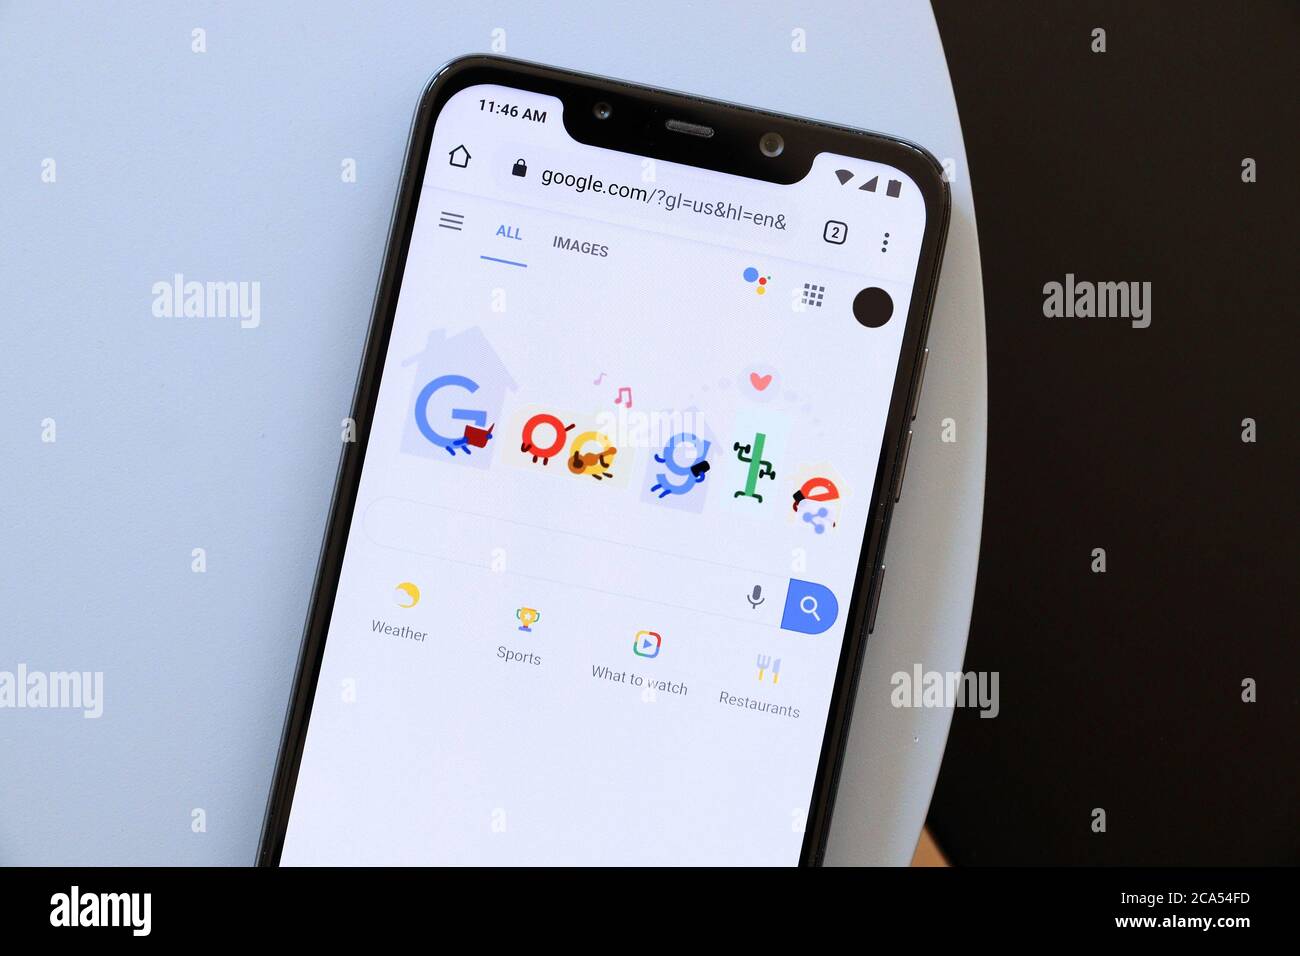 WARSAW, POLAND - APRIL 21, 2020: Google search website displayed on a Xiaomi F1 Pocophone Android smart phone. Stock Photo